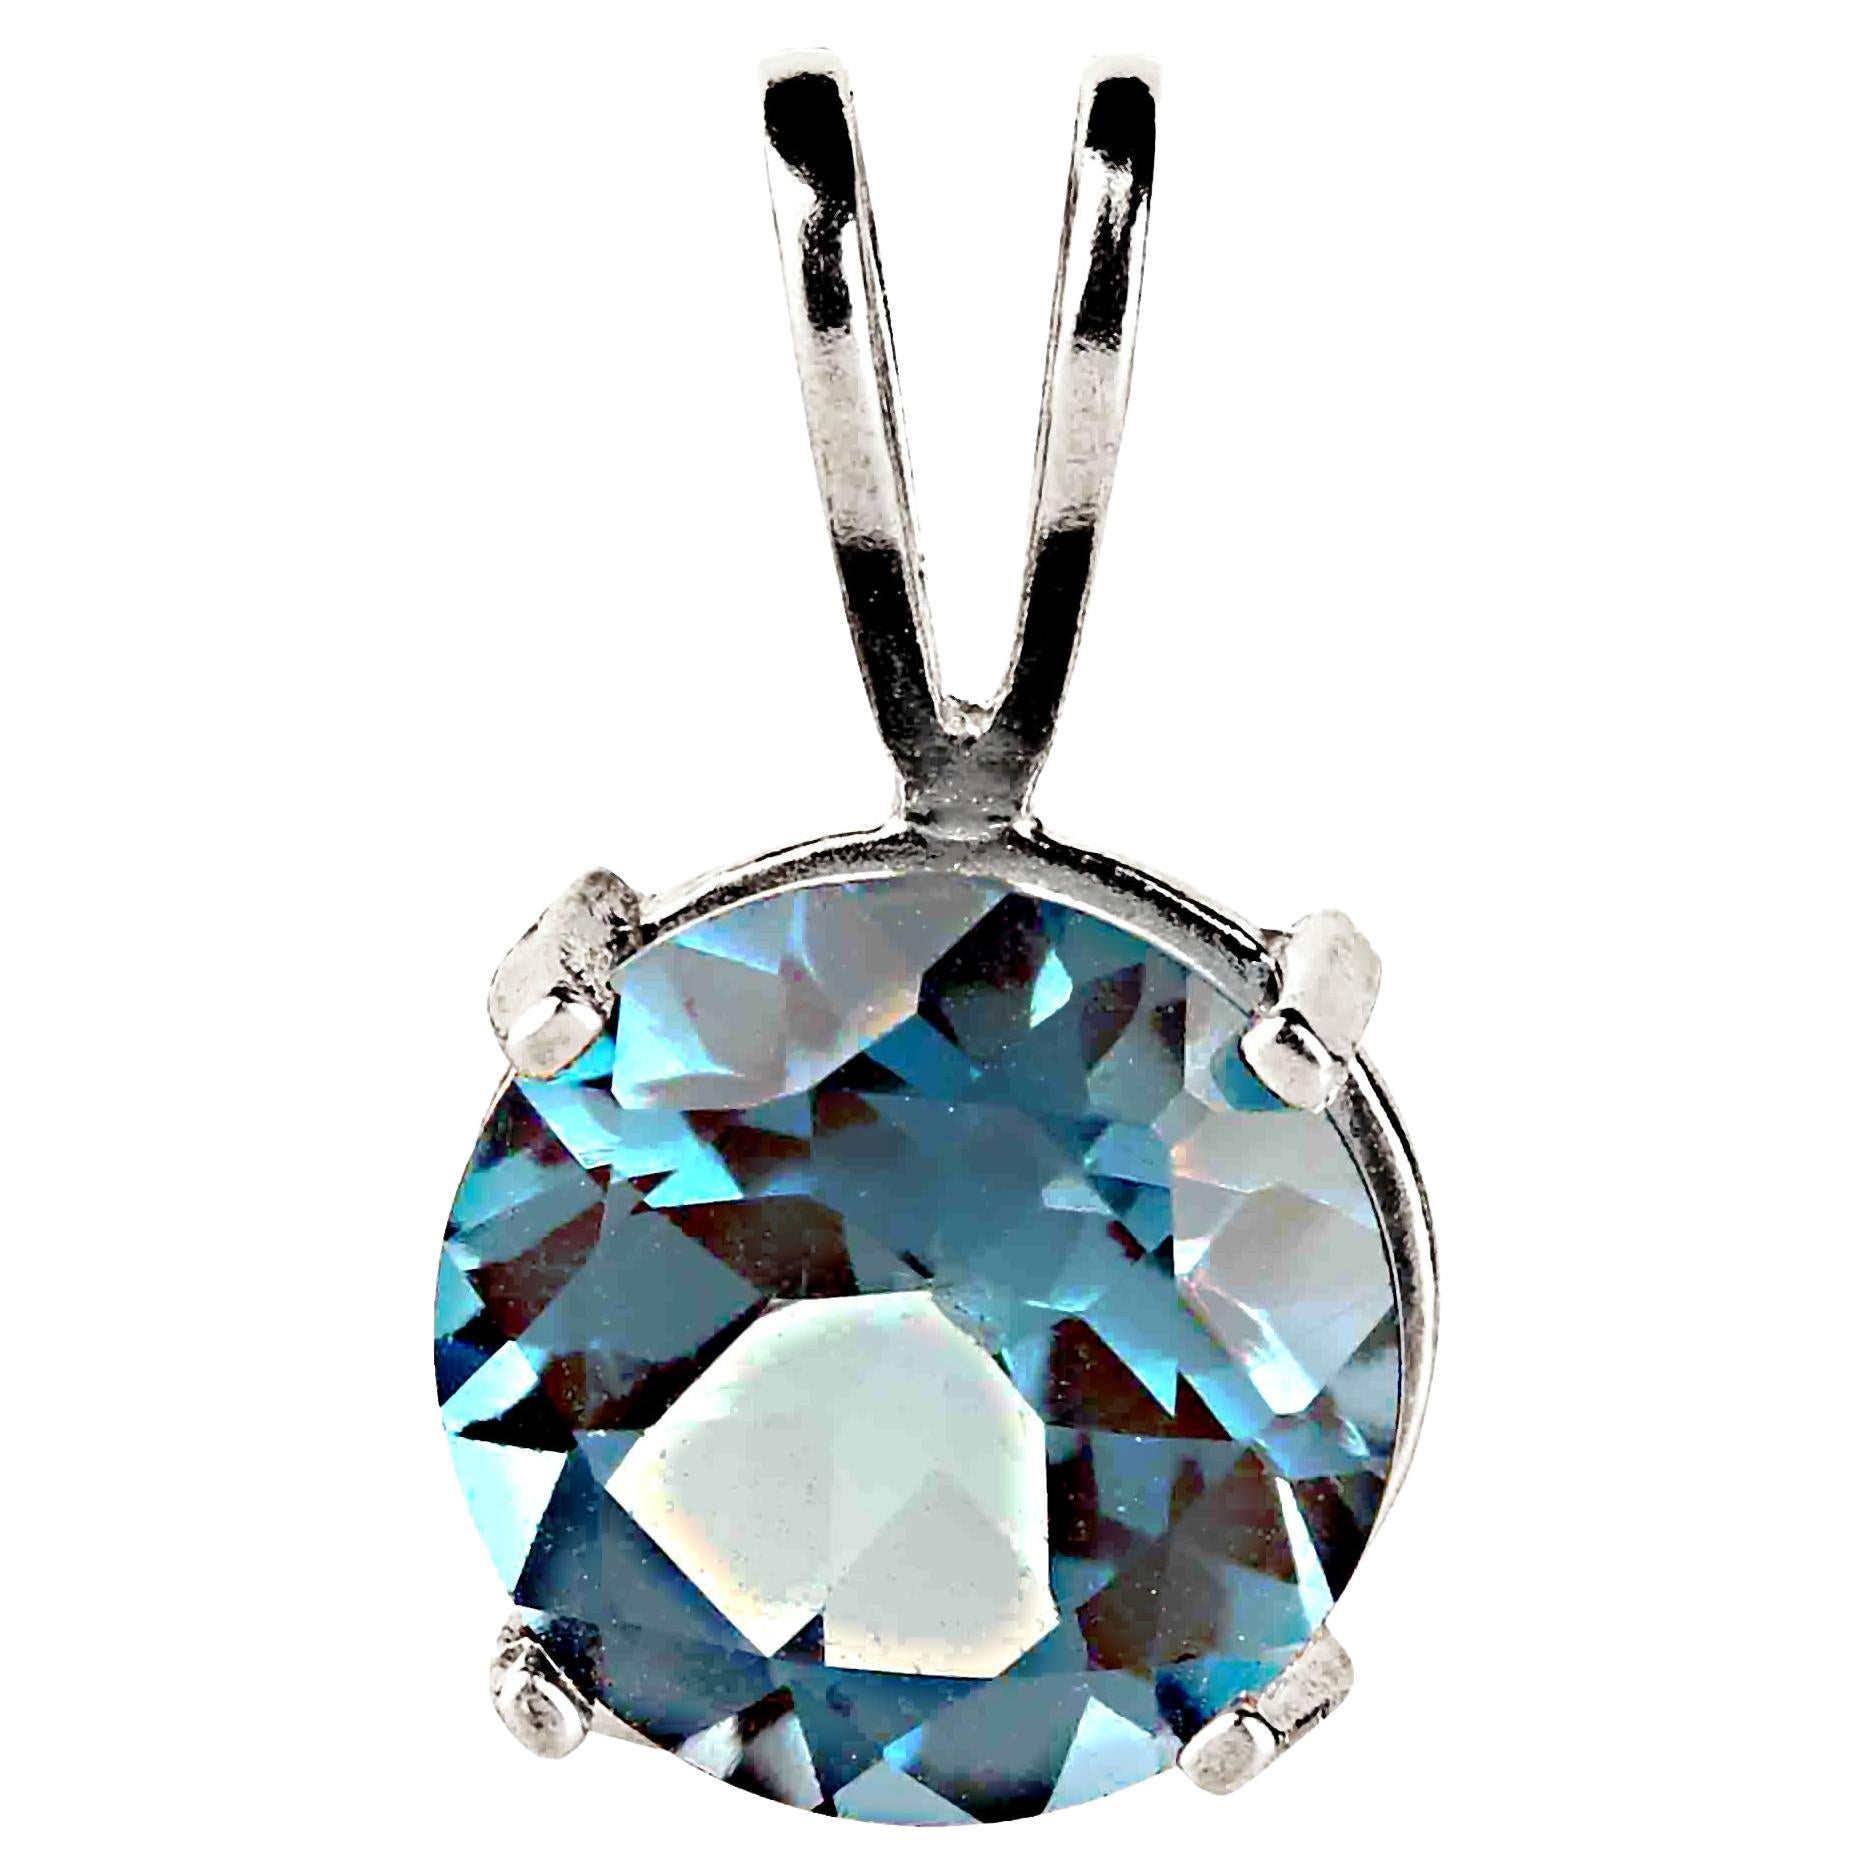 AJD 4.2ct Round London Blue Topaz in Sterling Silver Pendant